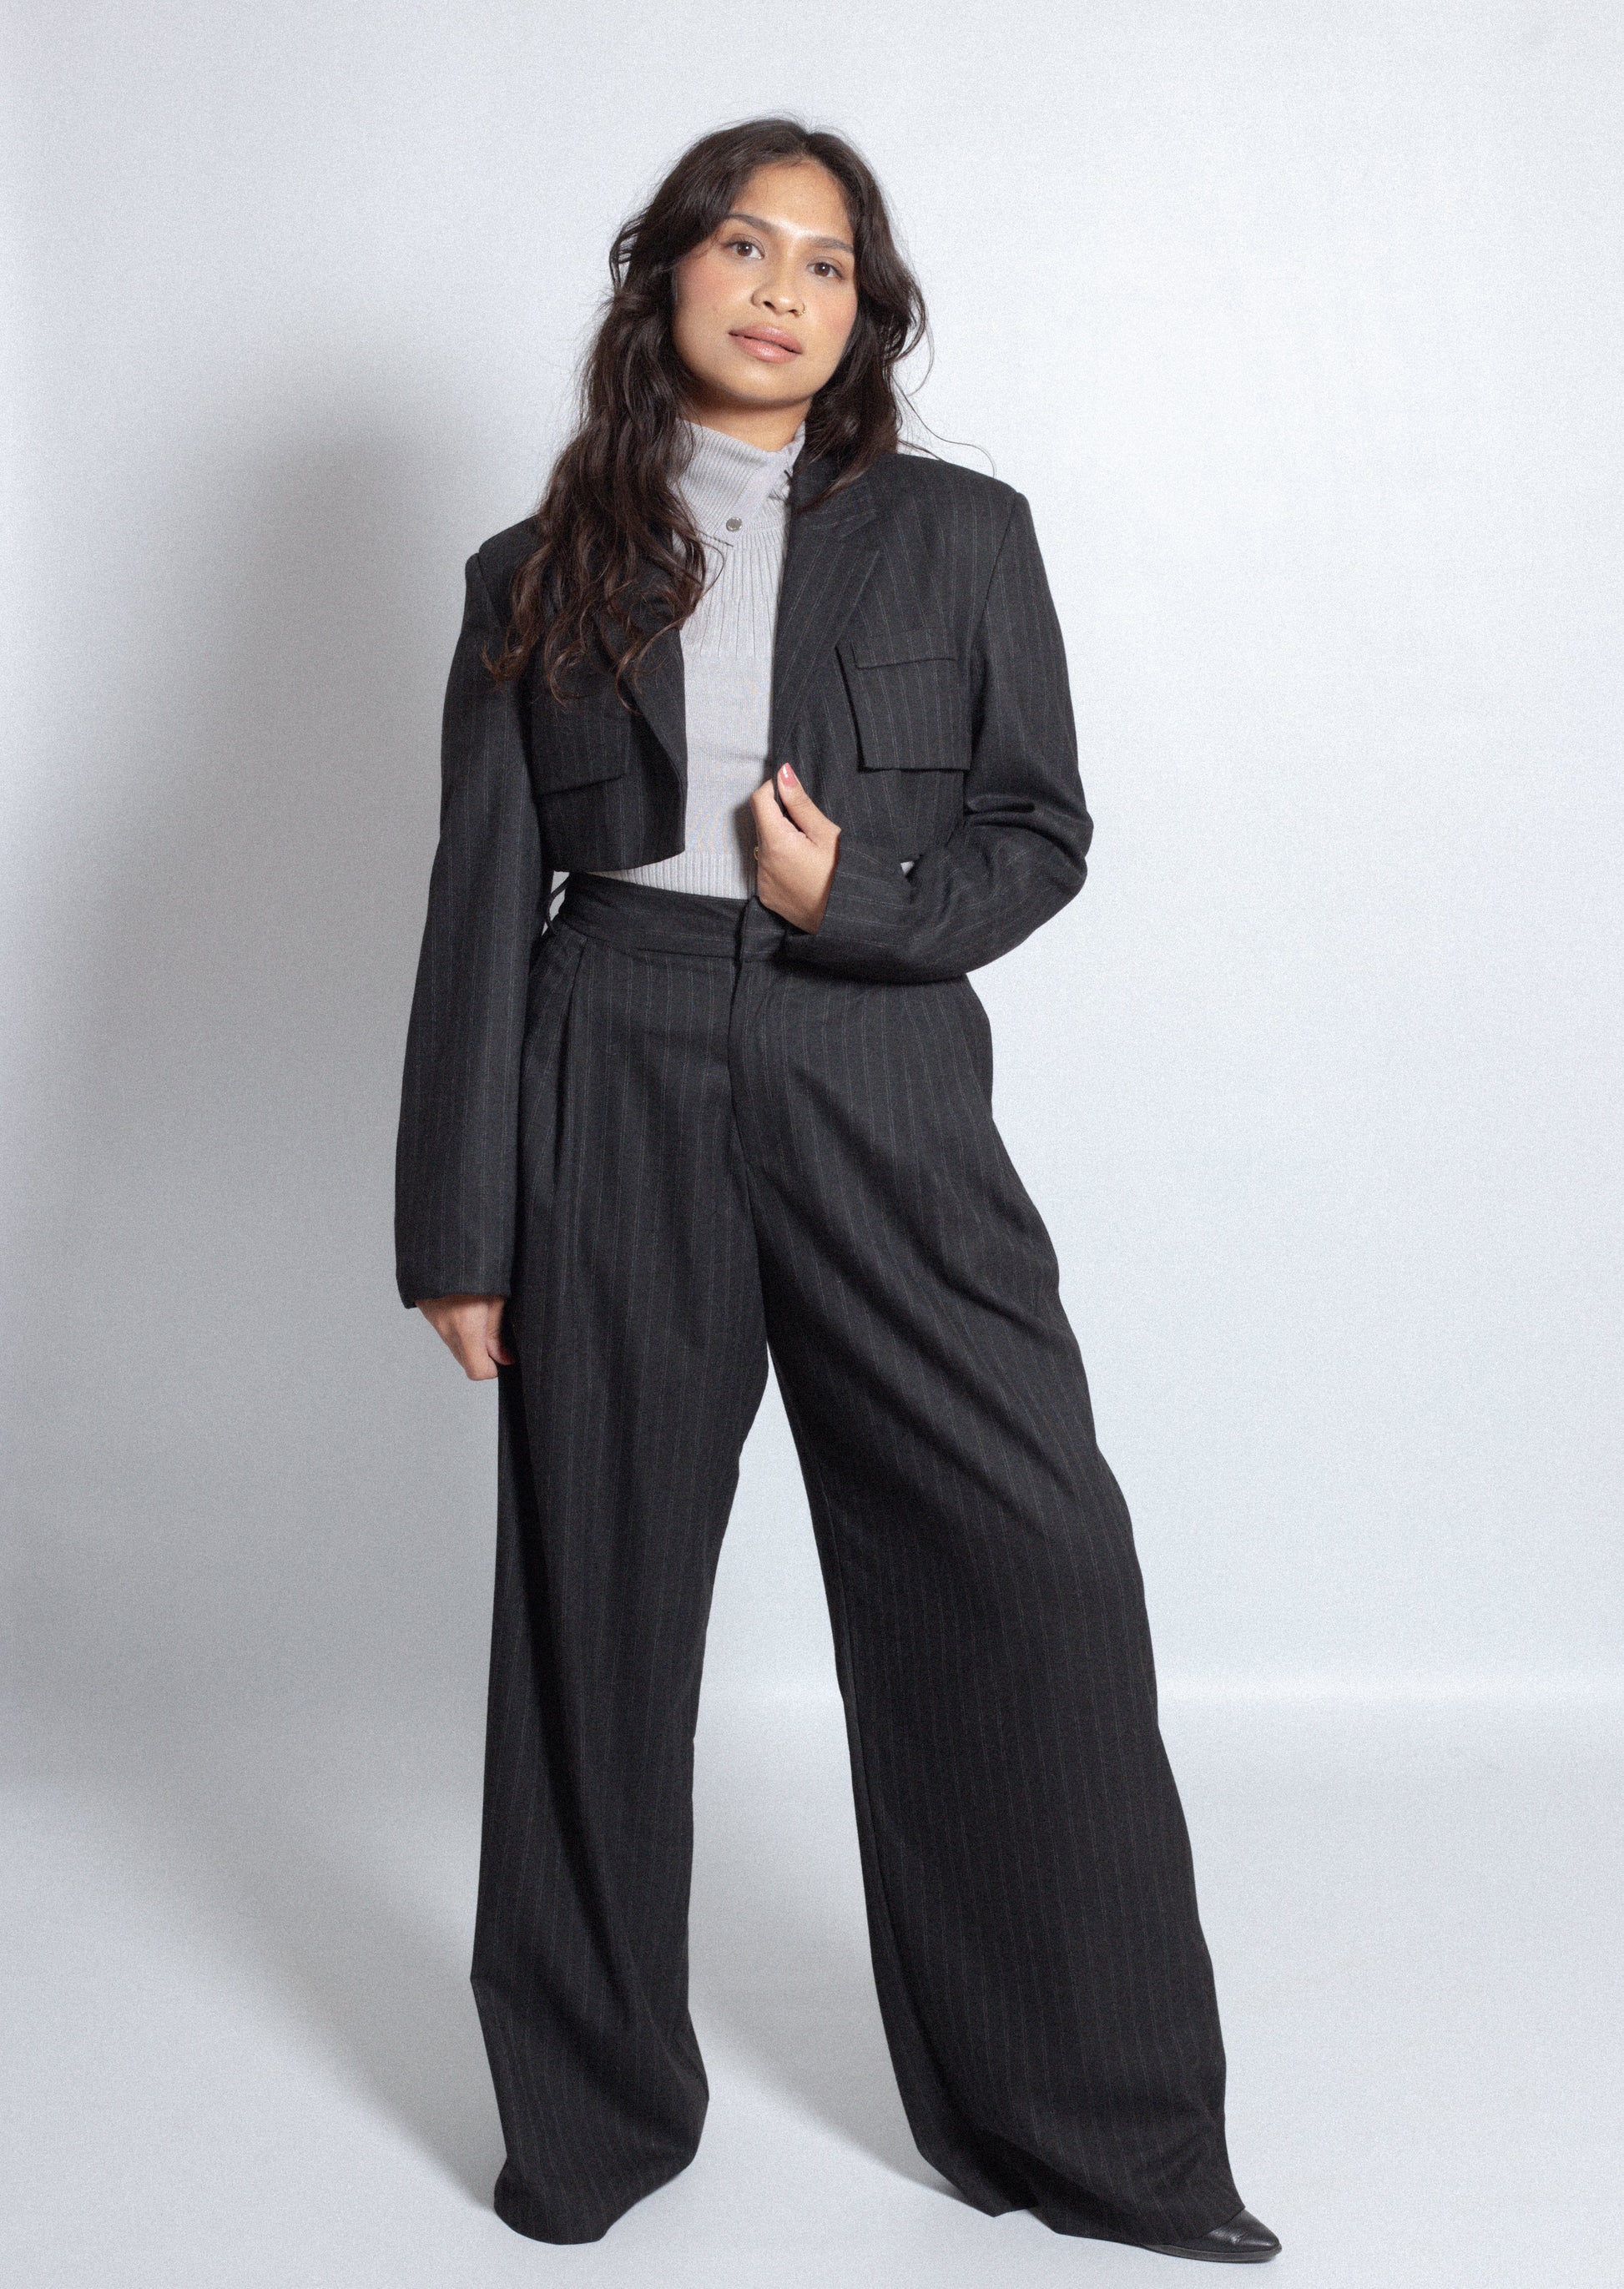 High-waisted striped trousers, Striped pants, Women's fashion, your lookbook, slow fashion,Chic trousers,Fashionable pants, trendy bottoms, Versatile trousers, timeless style